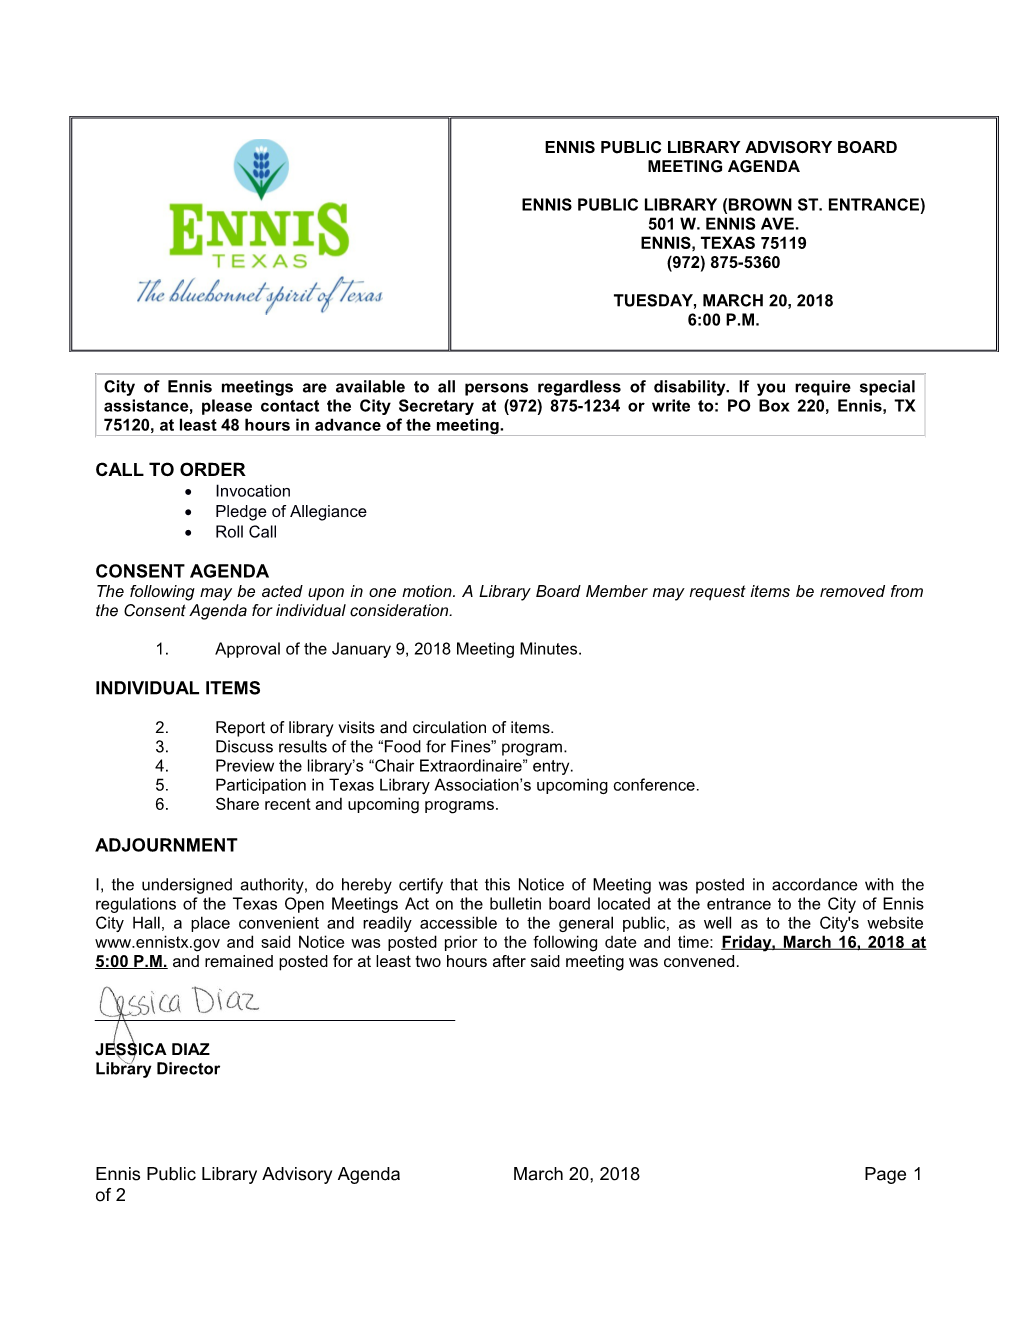 City of Ennis Meetings Are Available to All Persons Regardless of Disability. If You Require